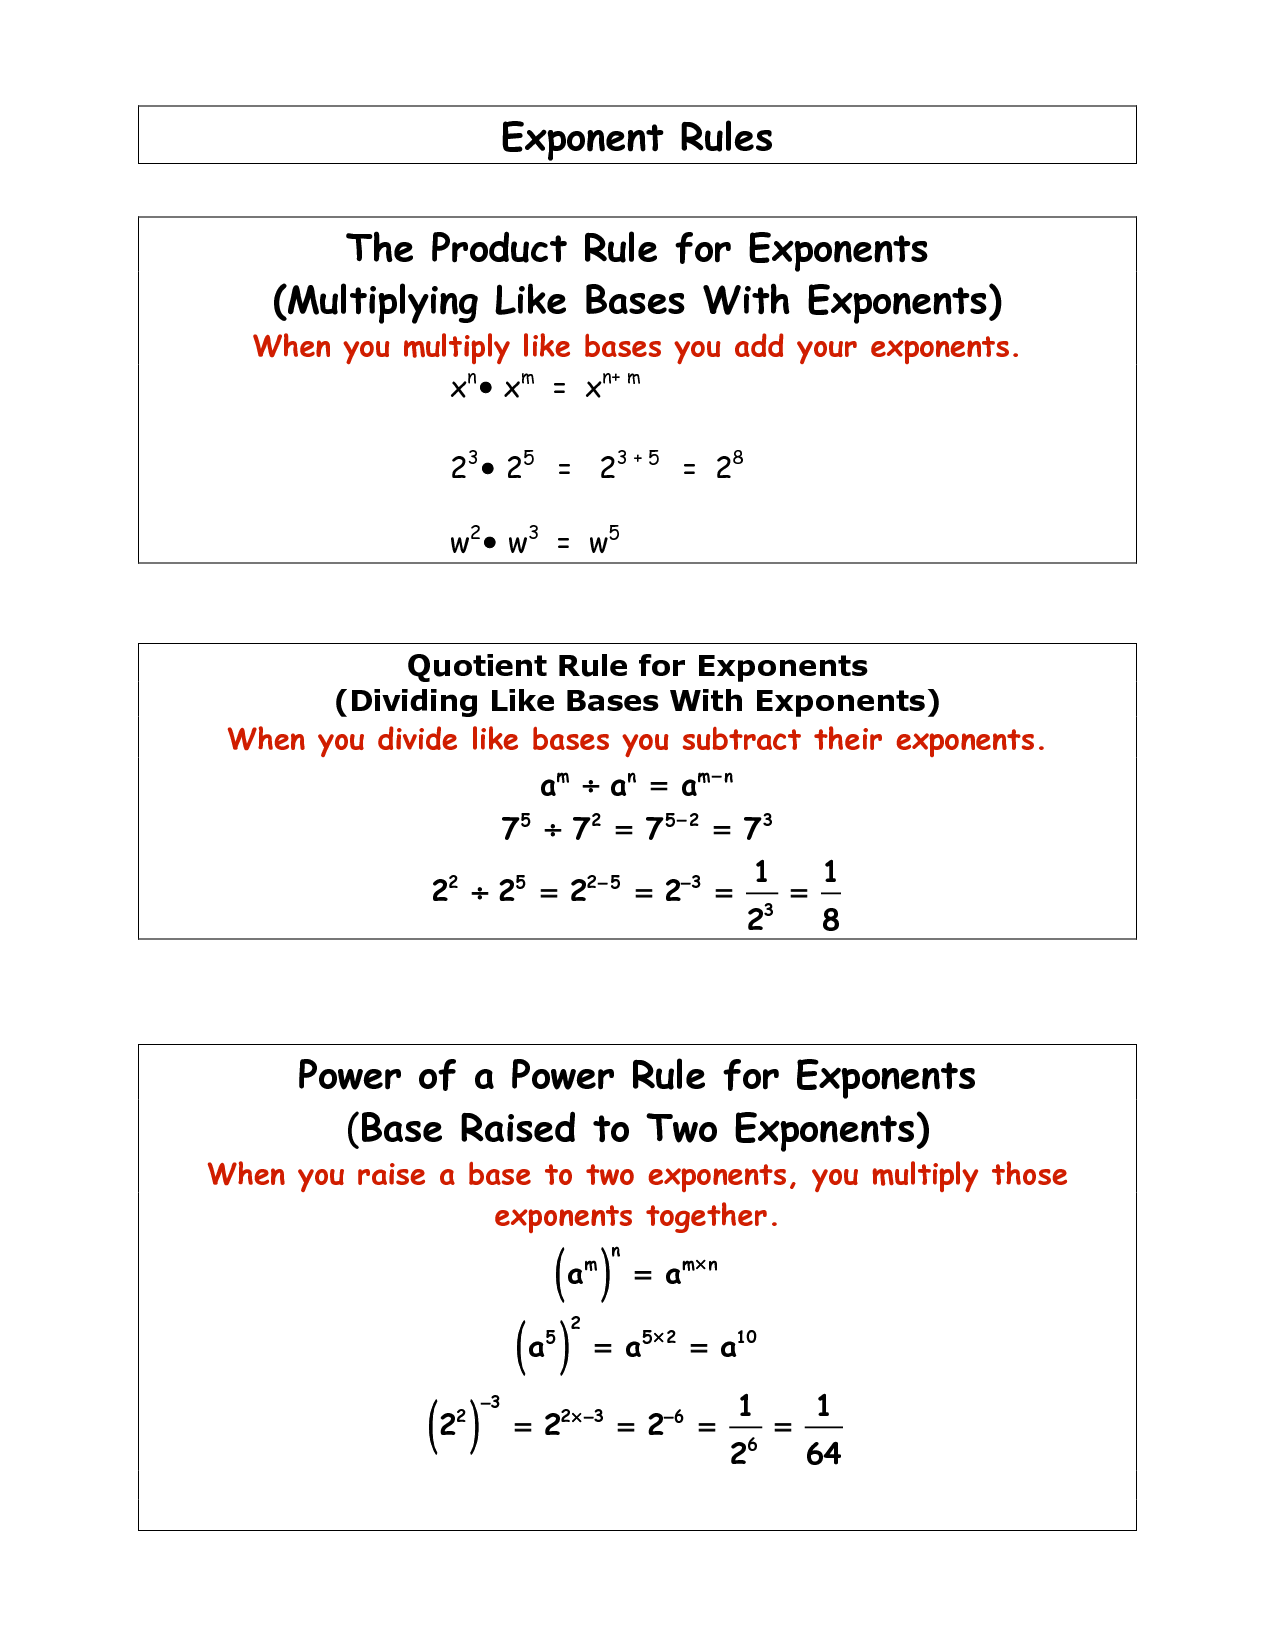 get-rules-of-exponents-worksheet-gif-sutewo